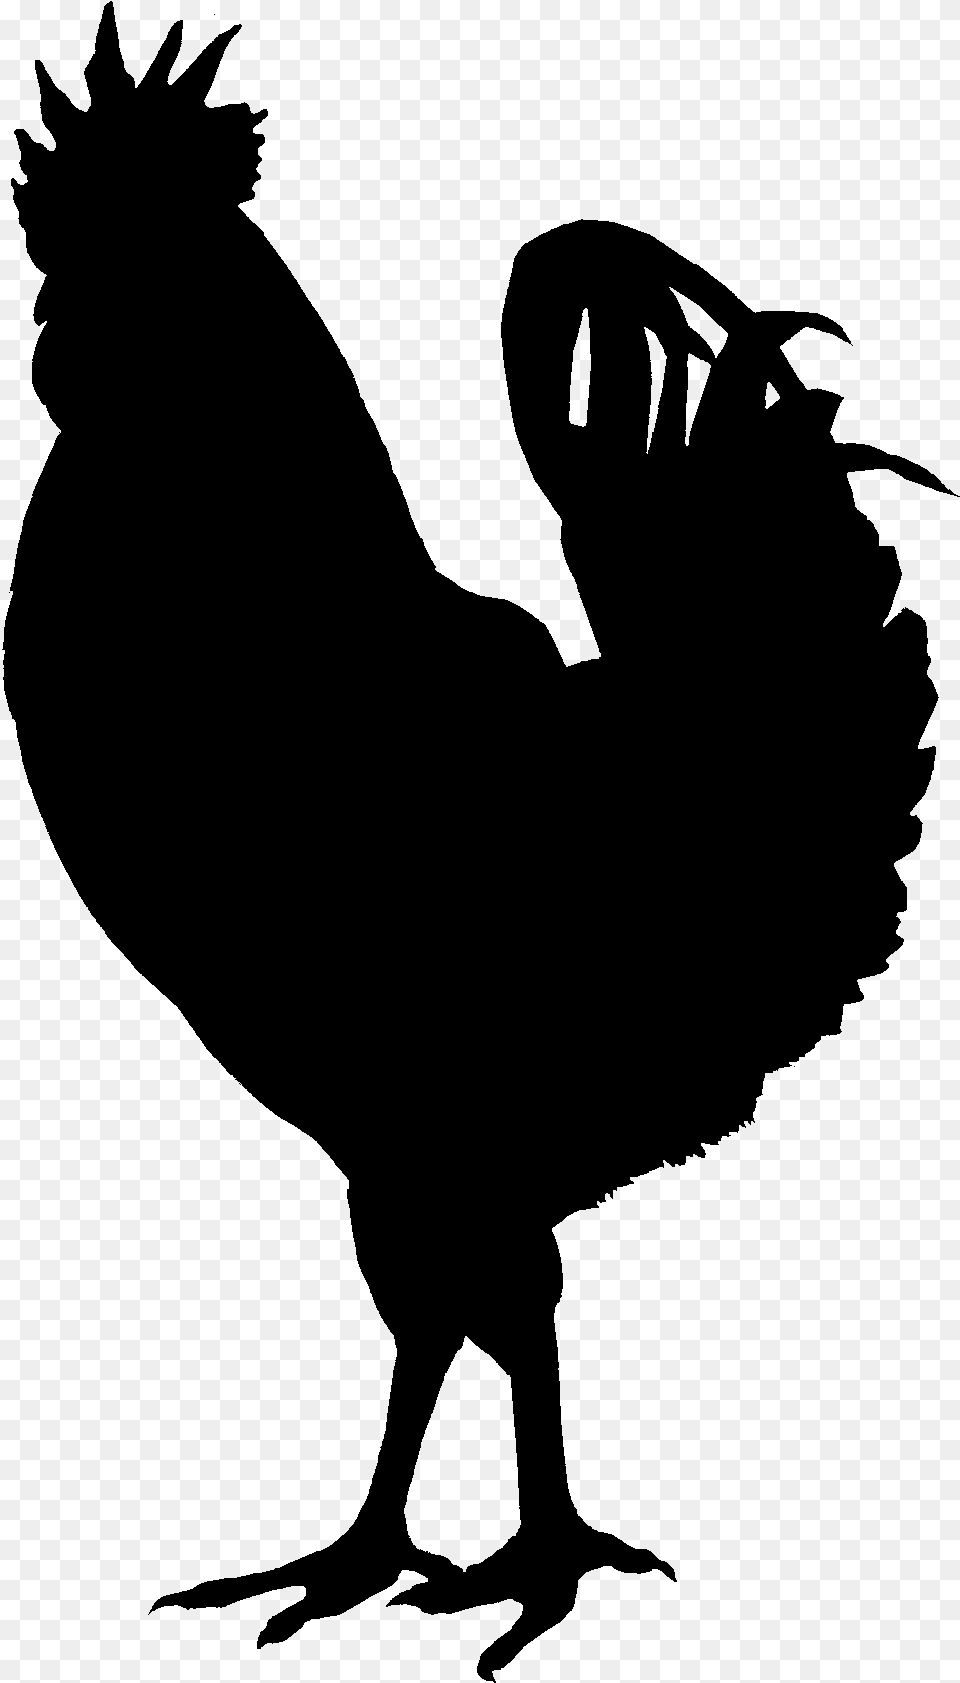 Transparent Hen Clipart Black And White Black Chicken Silhouette Transparent, Gray Png Image